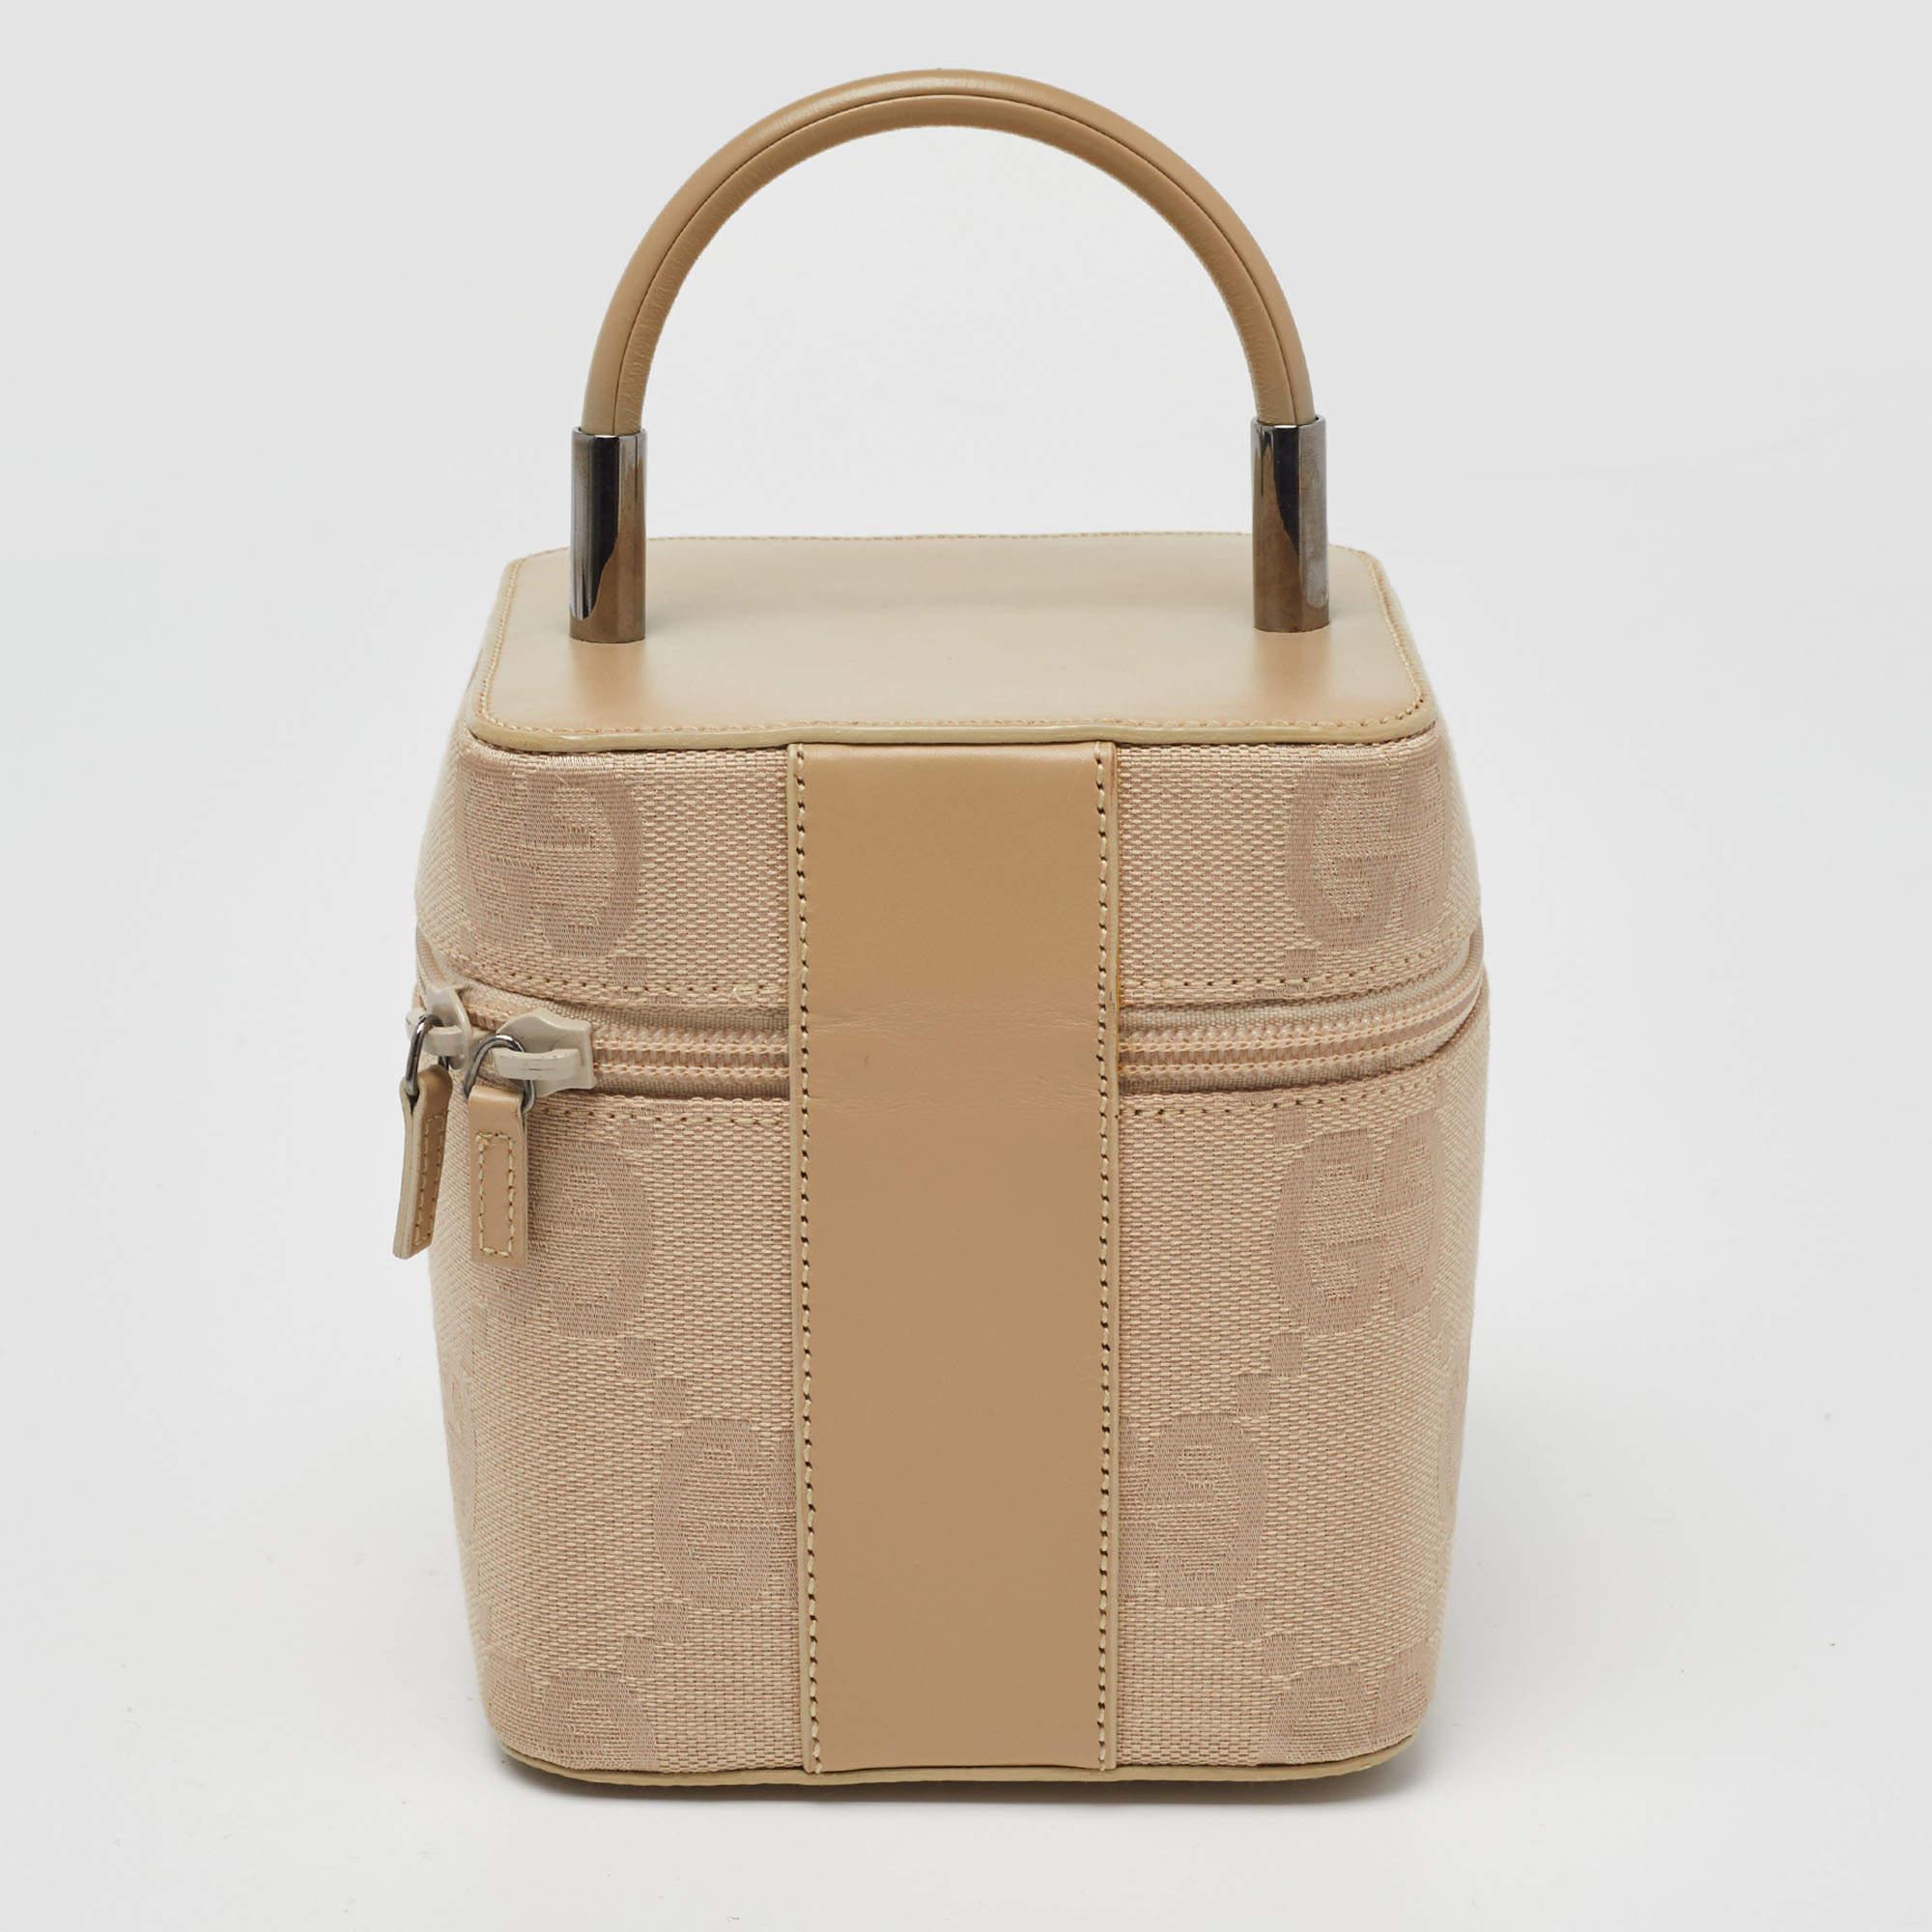 Gucci Beige GG Canvas and Leather Vanity Bag 1